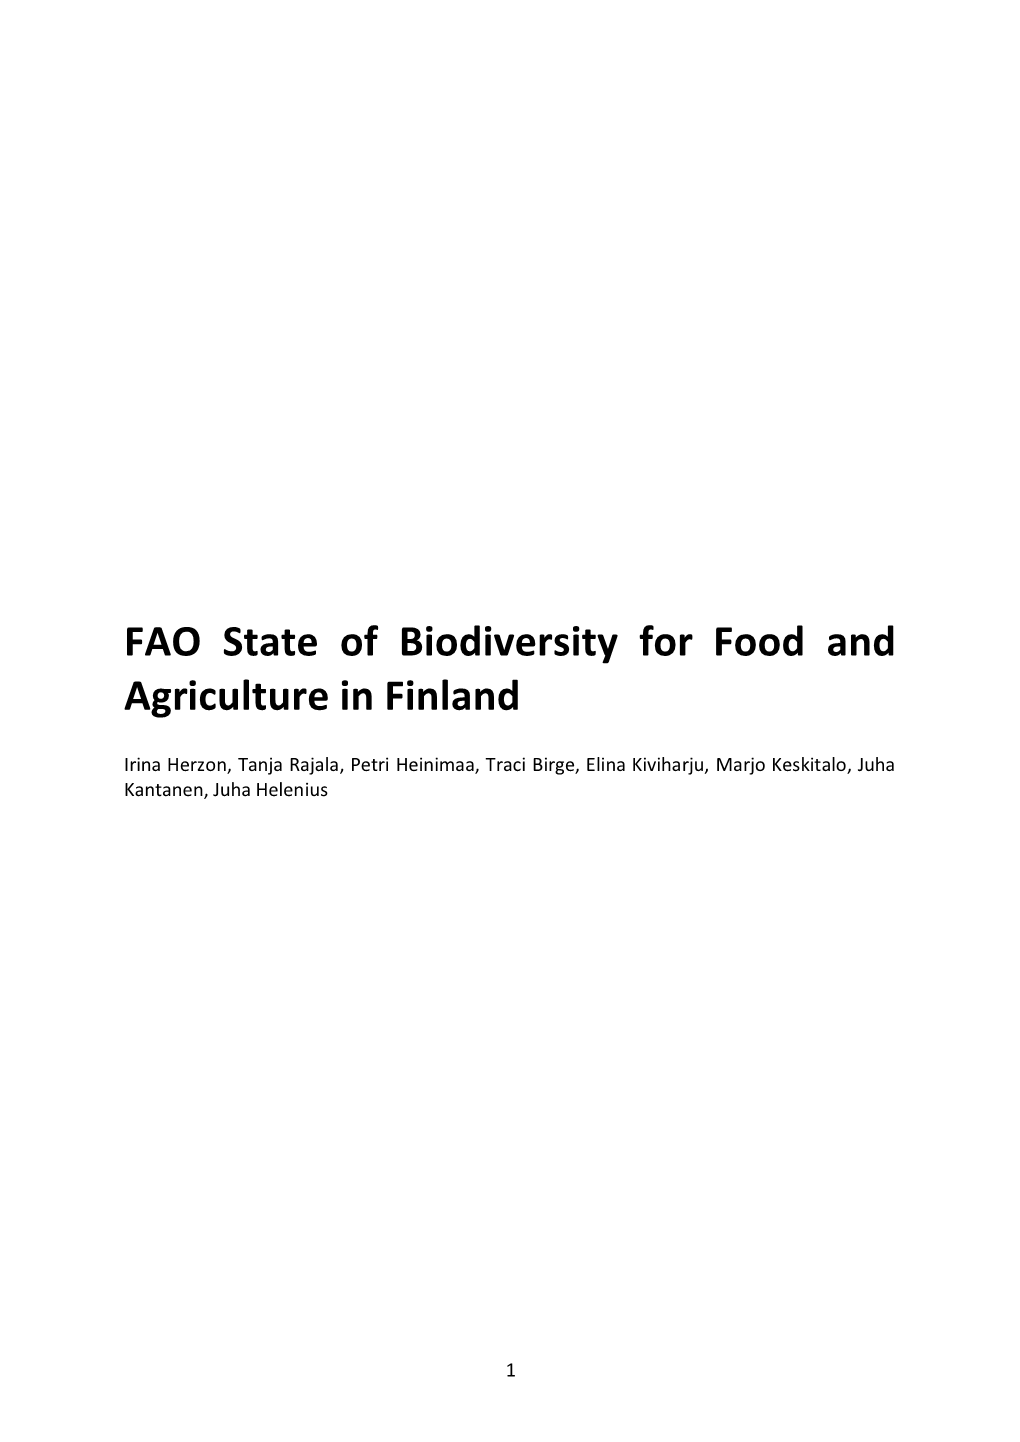 FAO State of Biodiversity for Food and Agriculture in Finland